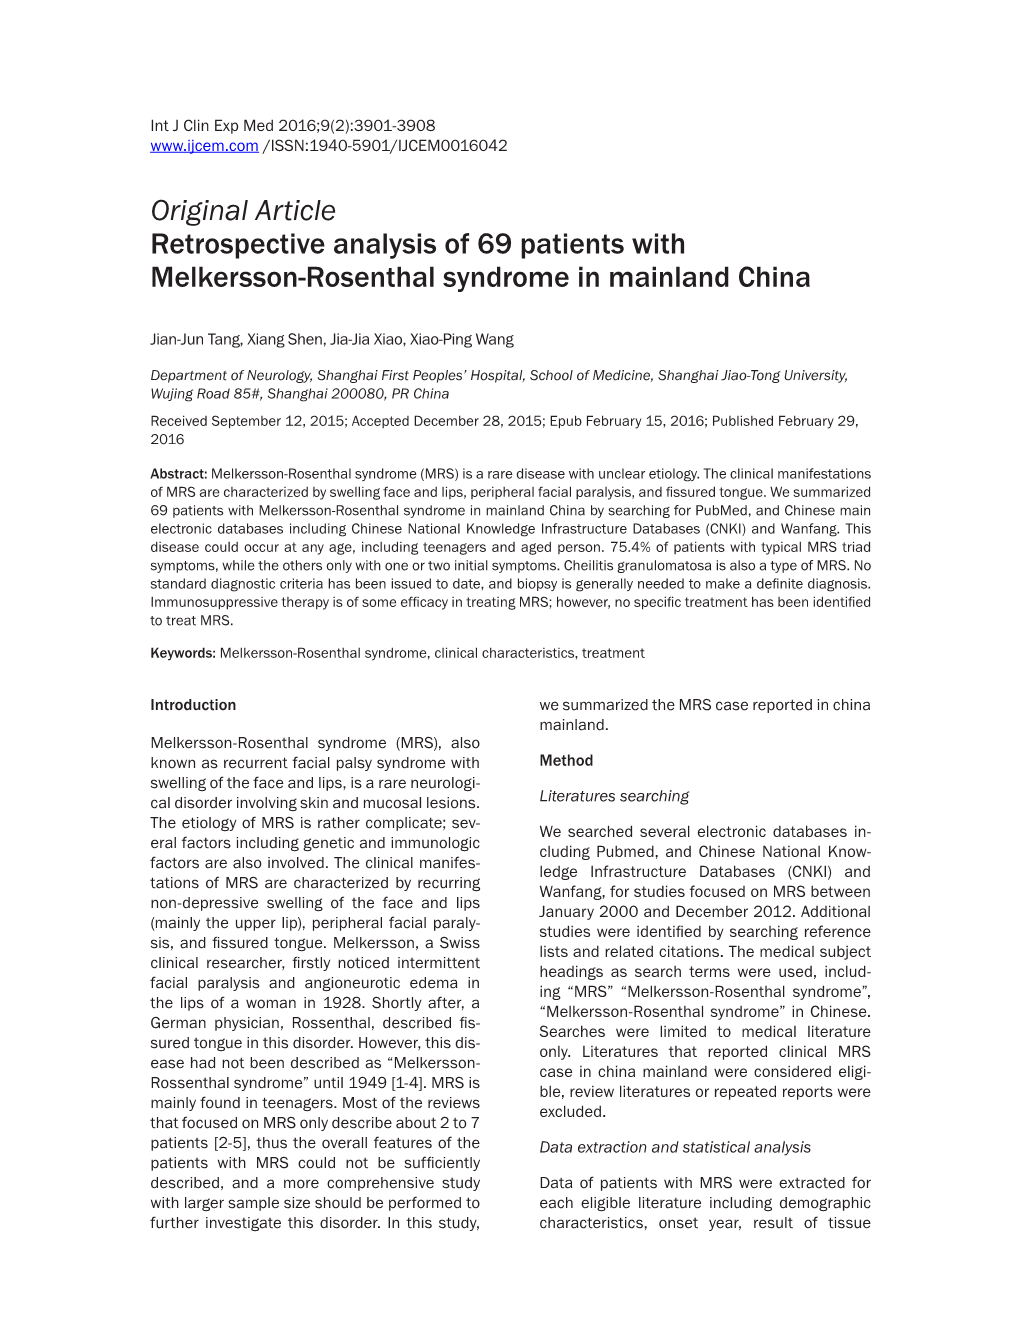 Original Article Retrospective Analysis of 69 Patients with Melkersson-Rosenthal Syndrome in Mainland China